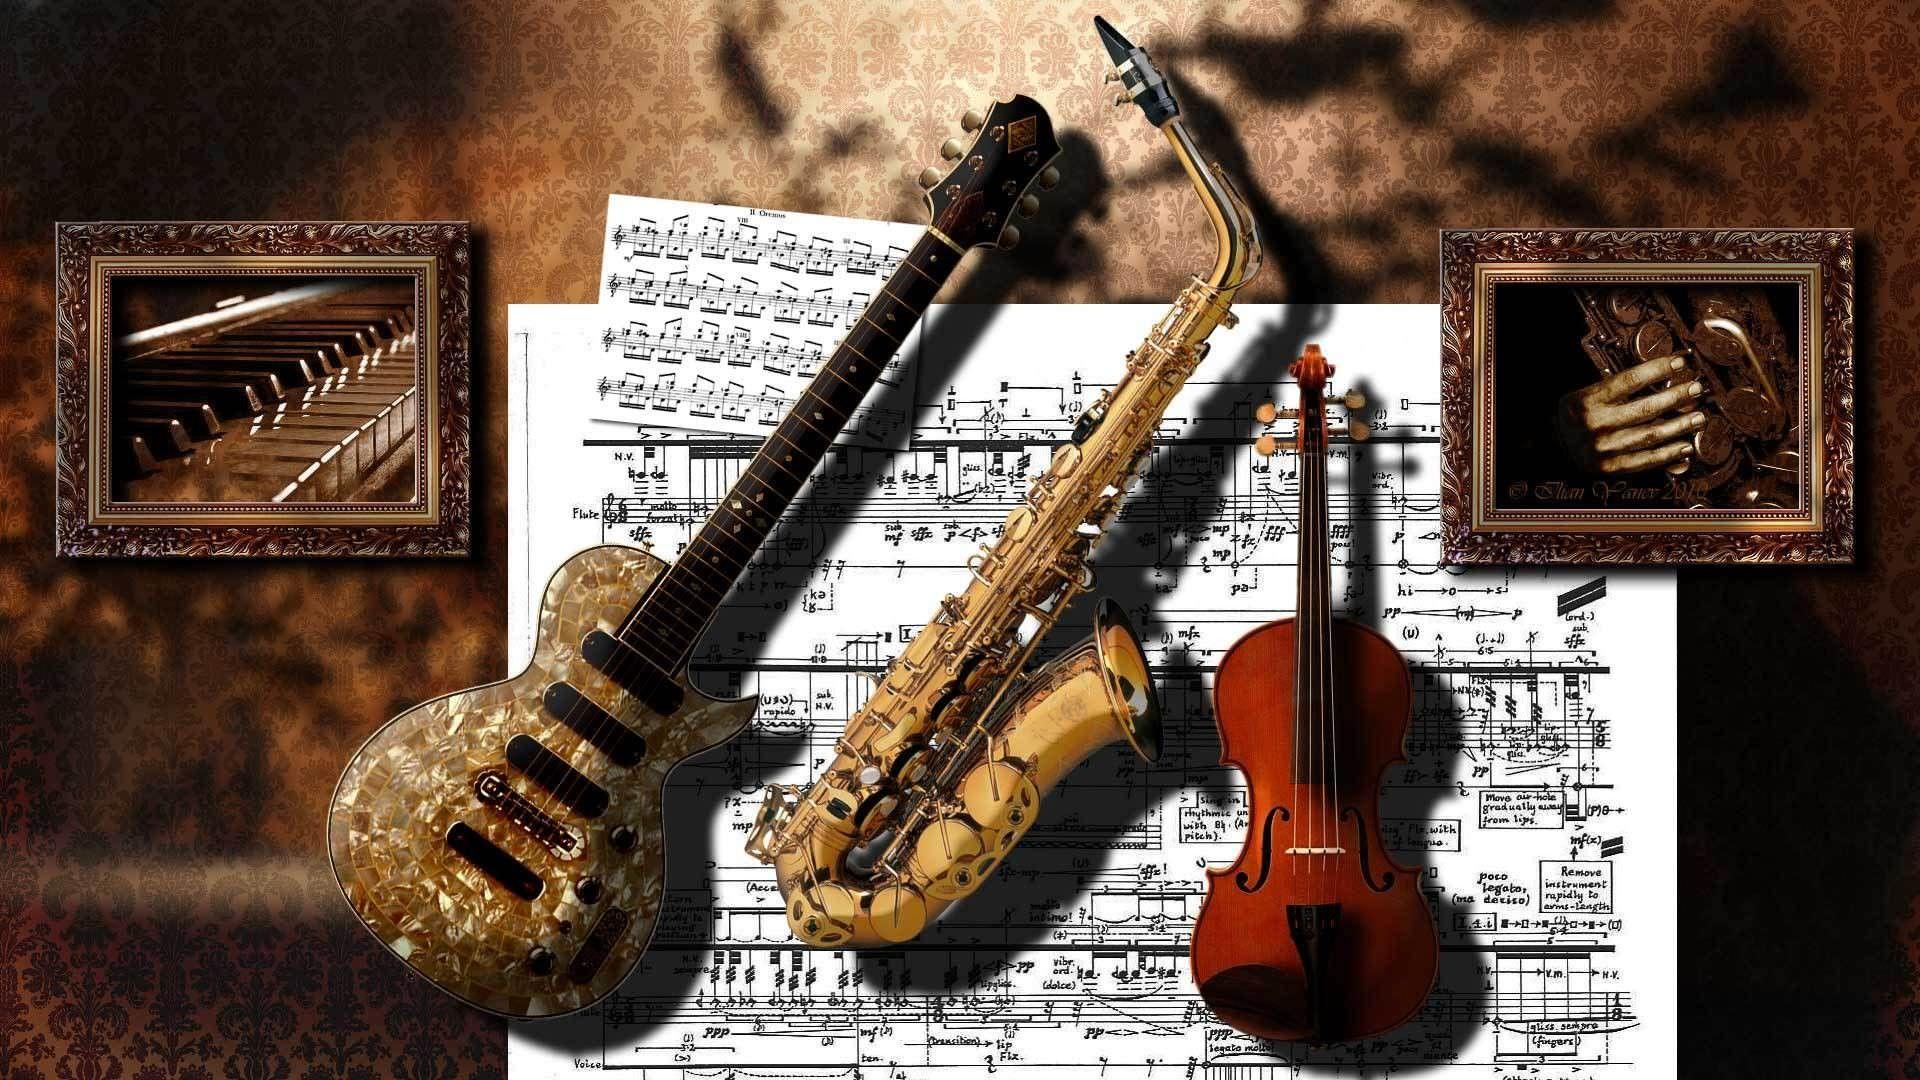 HD Wallpapers Of Musical Instruments - Wallpaper Cave